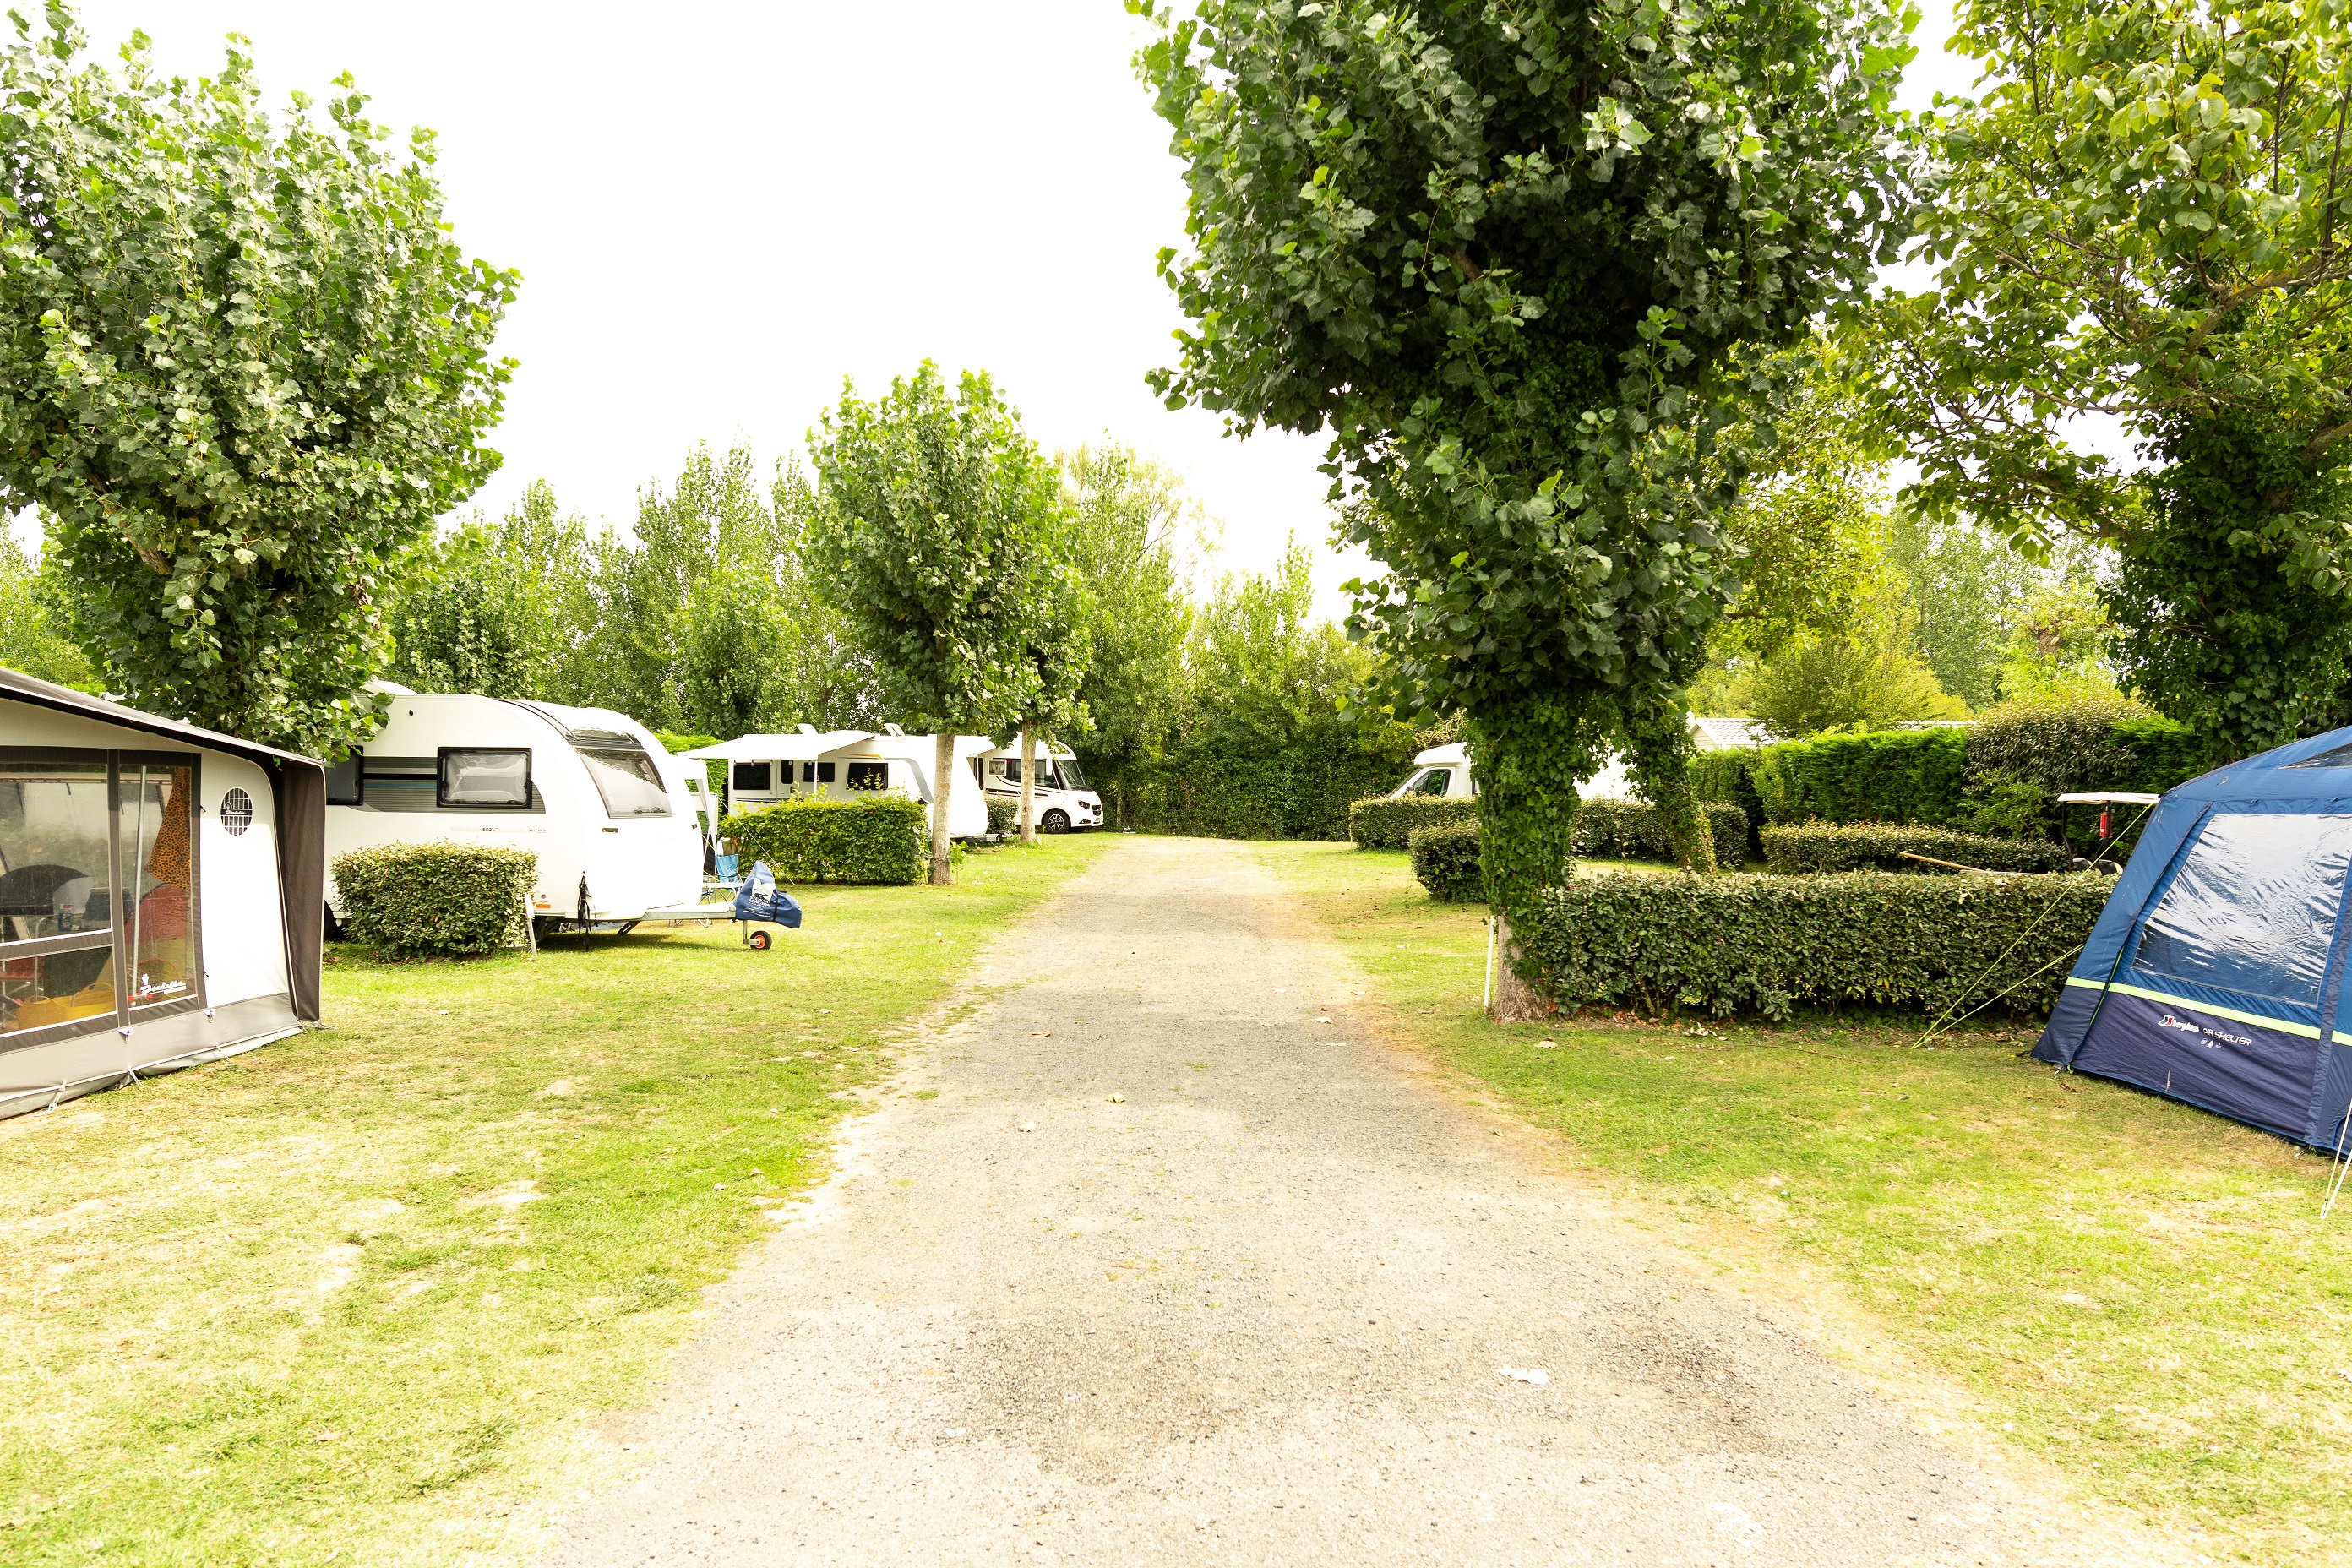 Pitch caravan  + 7.50 m  (water, electricity, drain, 2 people and 1 vehicle) 1/2 Ppl. 1/2 pers.